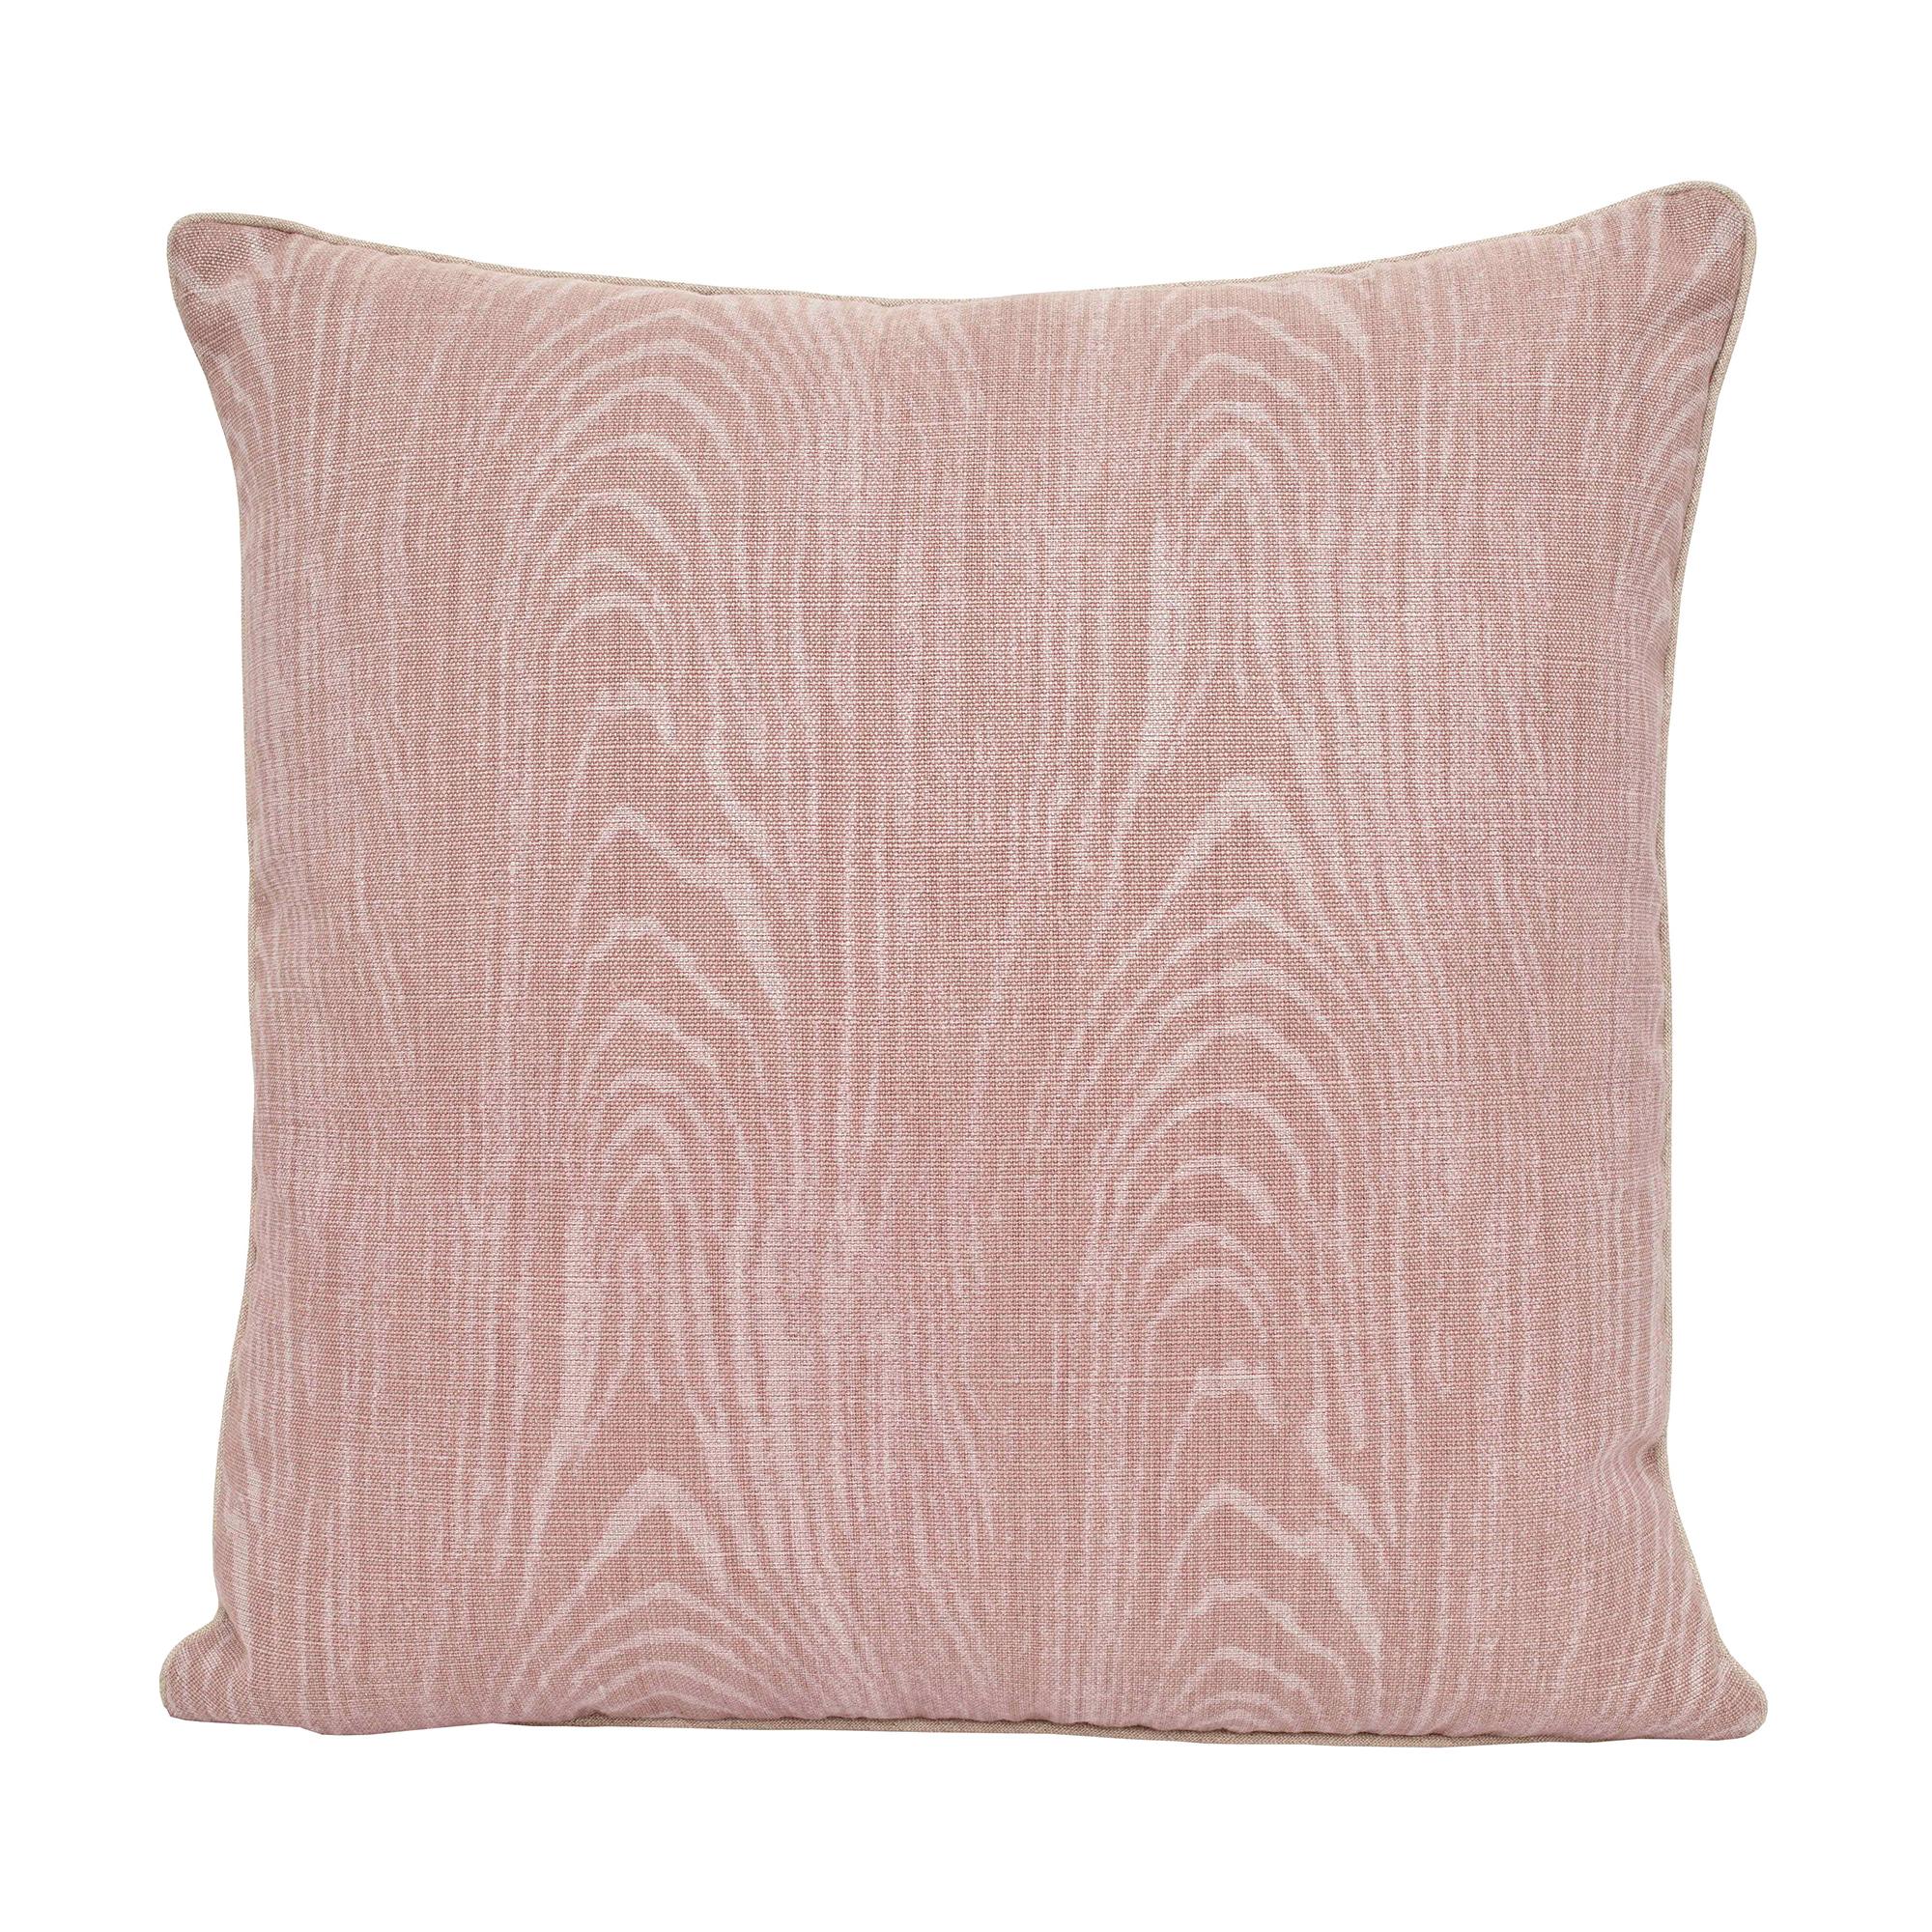 Hallerbos Pattern Accent Pillow by CuratedKravet